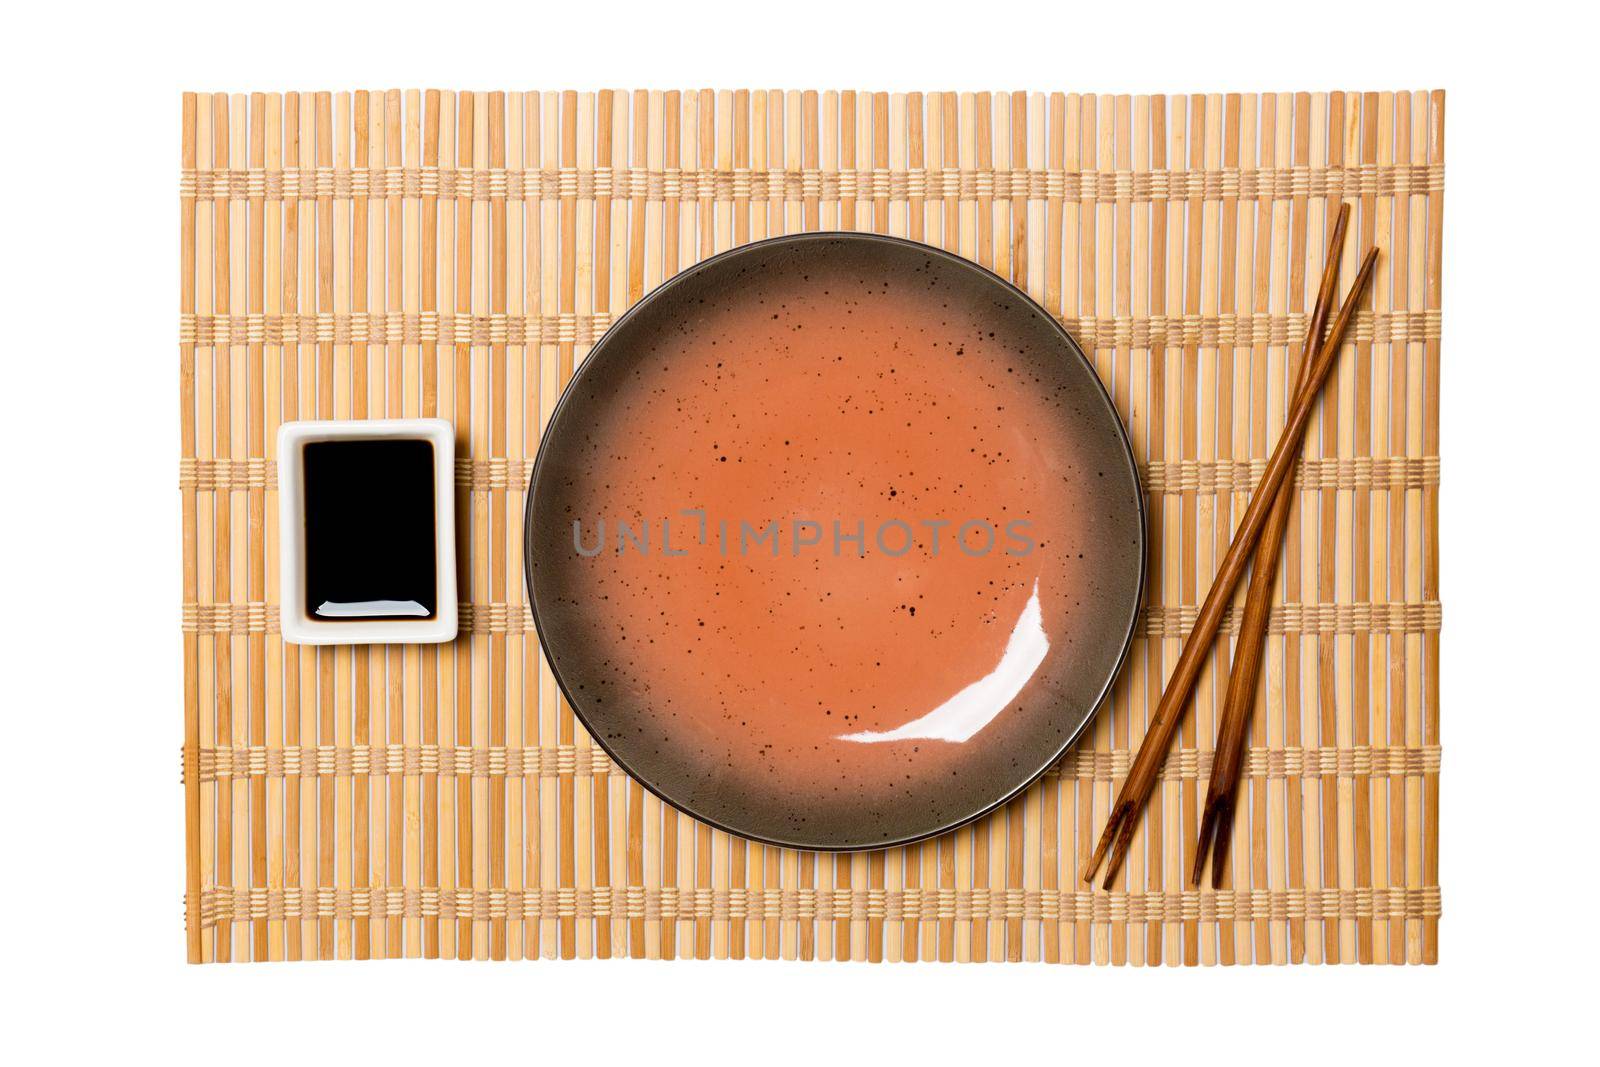 Empty round brown plate with chopsticks for sushi and soy sauce on yellow bamboo mat background. Top view with copy space for you design.